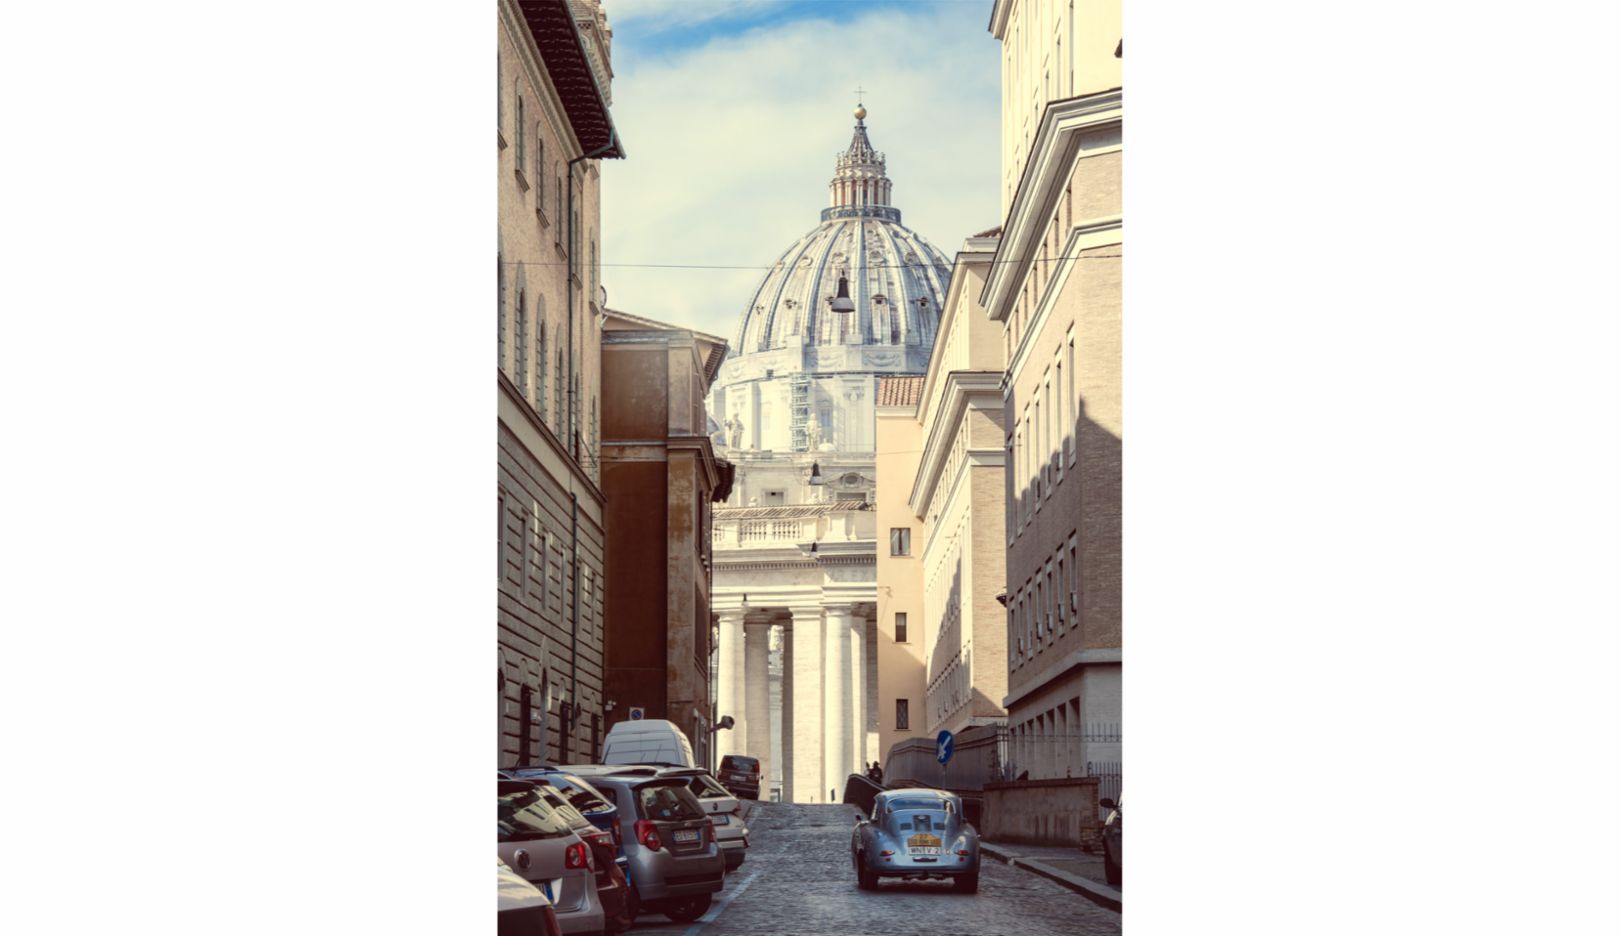 Marc Lieb reverentially guides the V2 towards St. Peter’s Basilica. The narrow lane becomes the perfect resonator for the engine sound. 